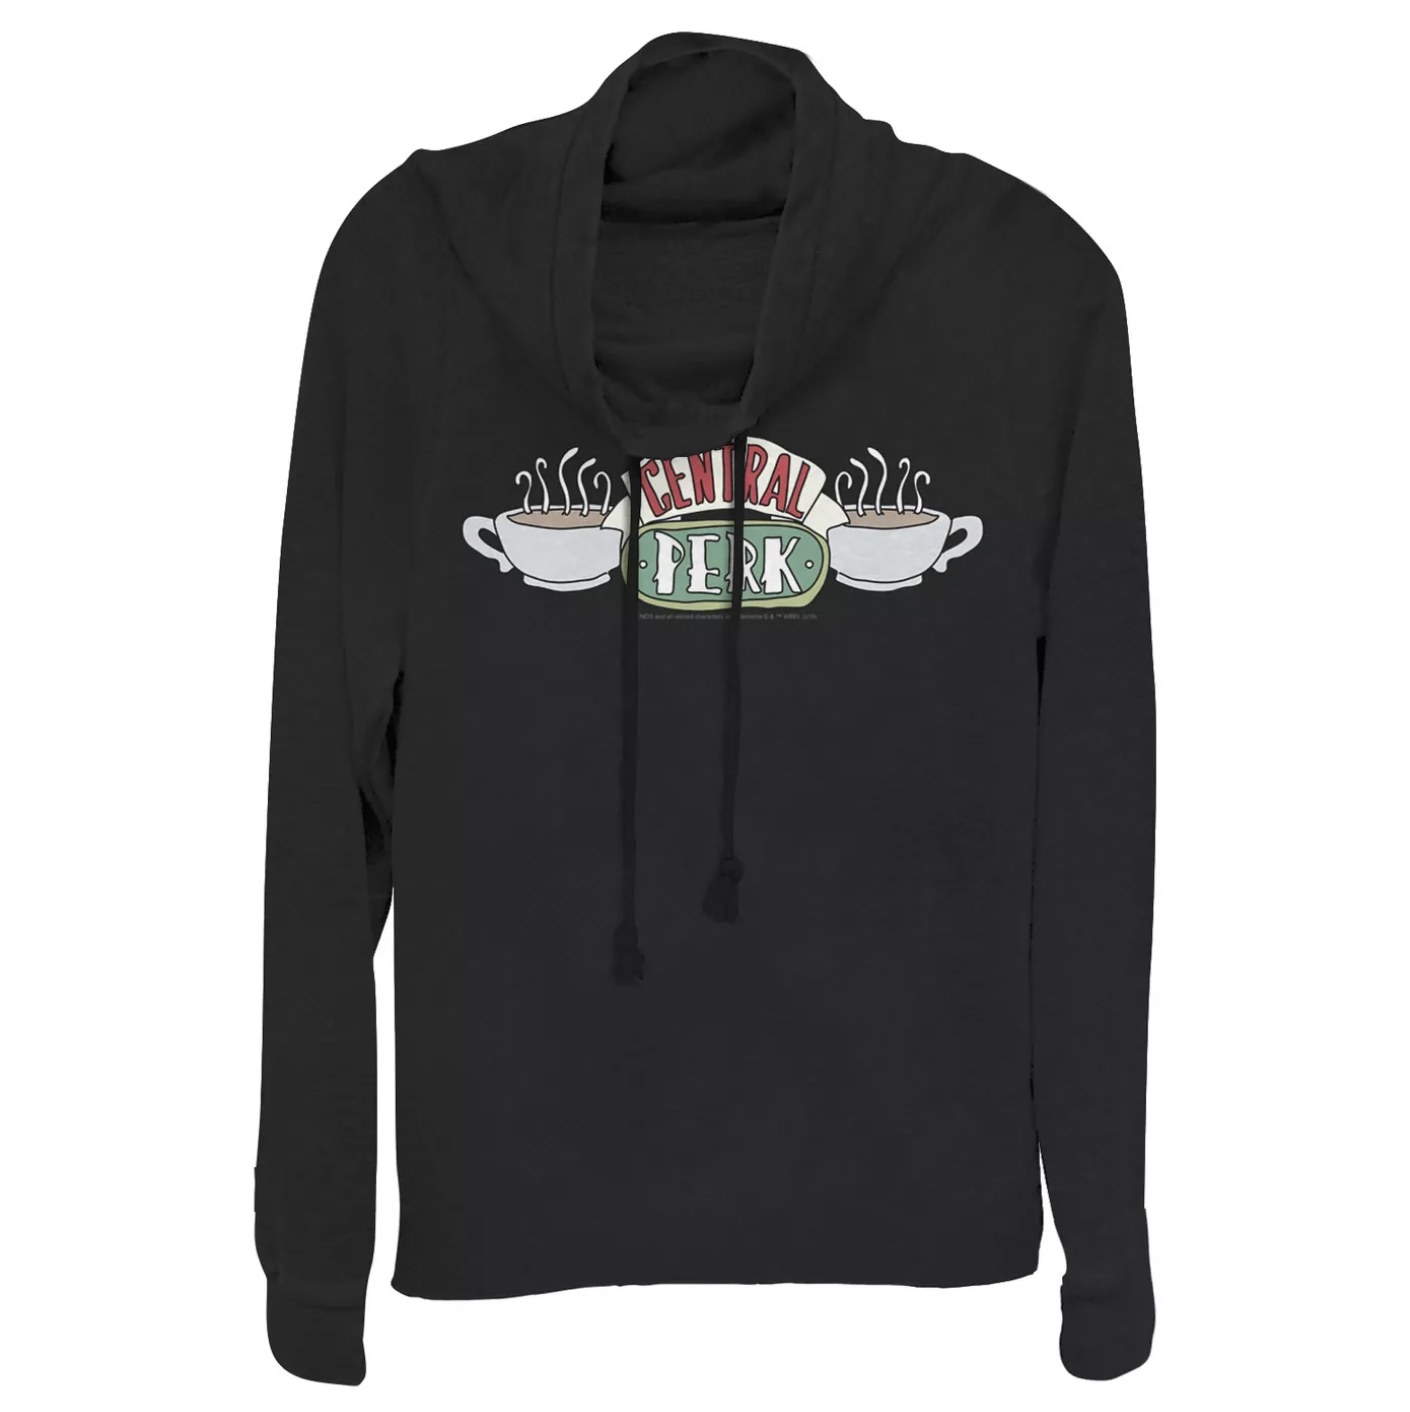 The black sweatshirt with the Central Perk logo on the front